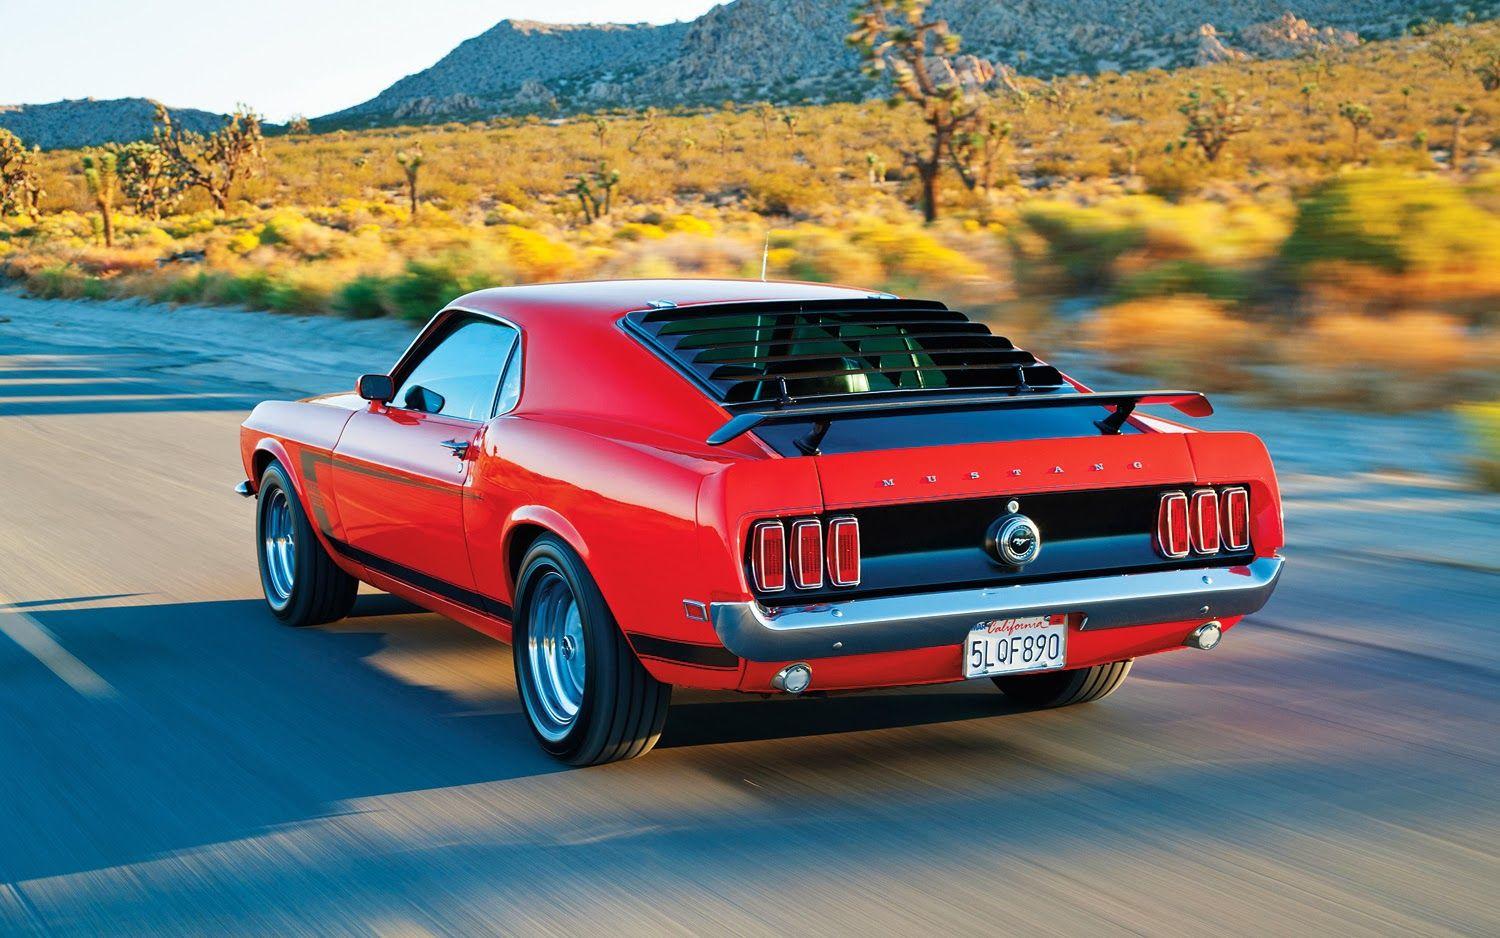 Red Ford Mustang Boss 302 Rare View Muscle Spo Wallpaper